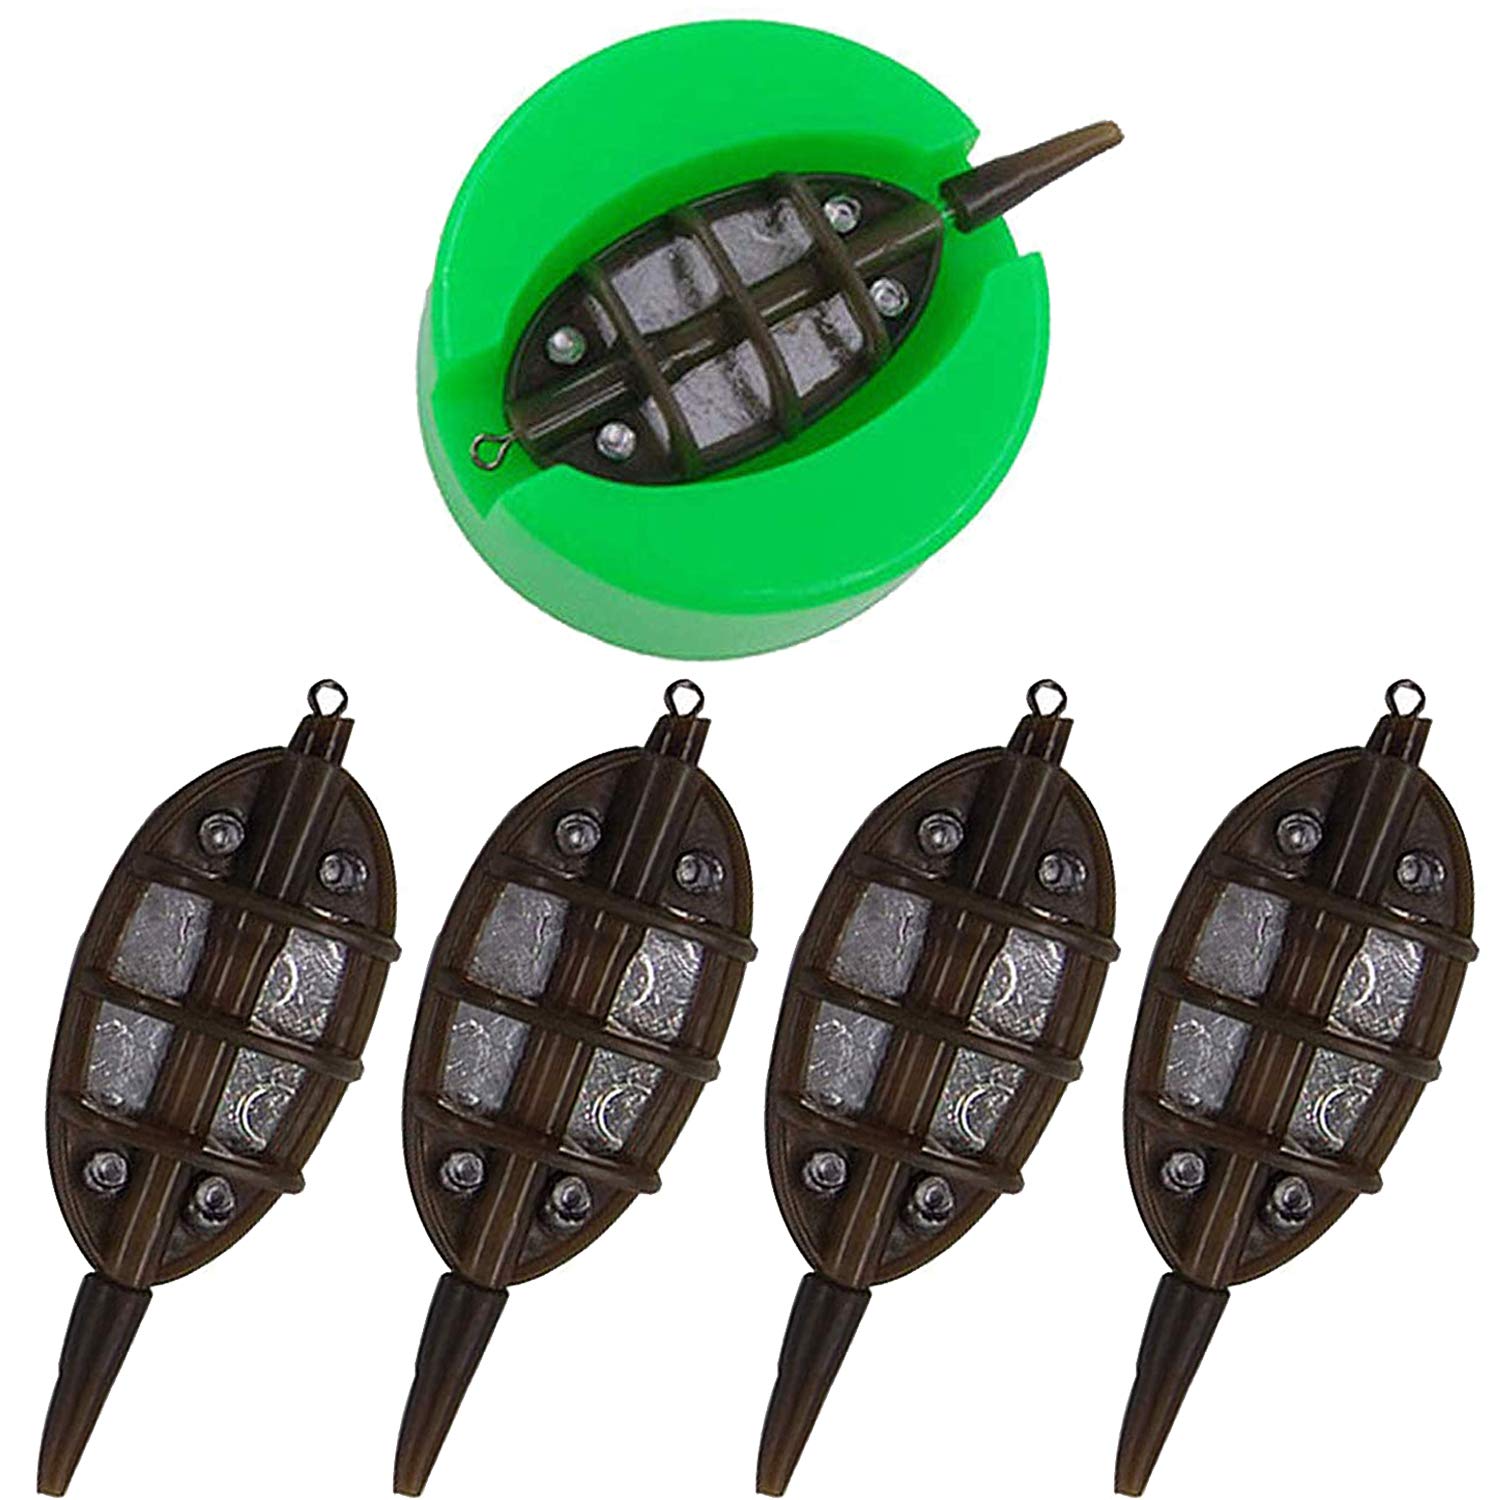  Inline Method Feeder Set Carp Fishing Tackle 4 Inline Method  Feeders with 1 Rubber Mould Carp Fishing Accessories : Sports & Outdoors